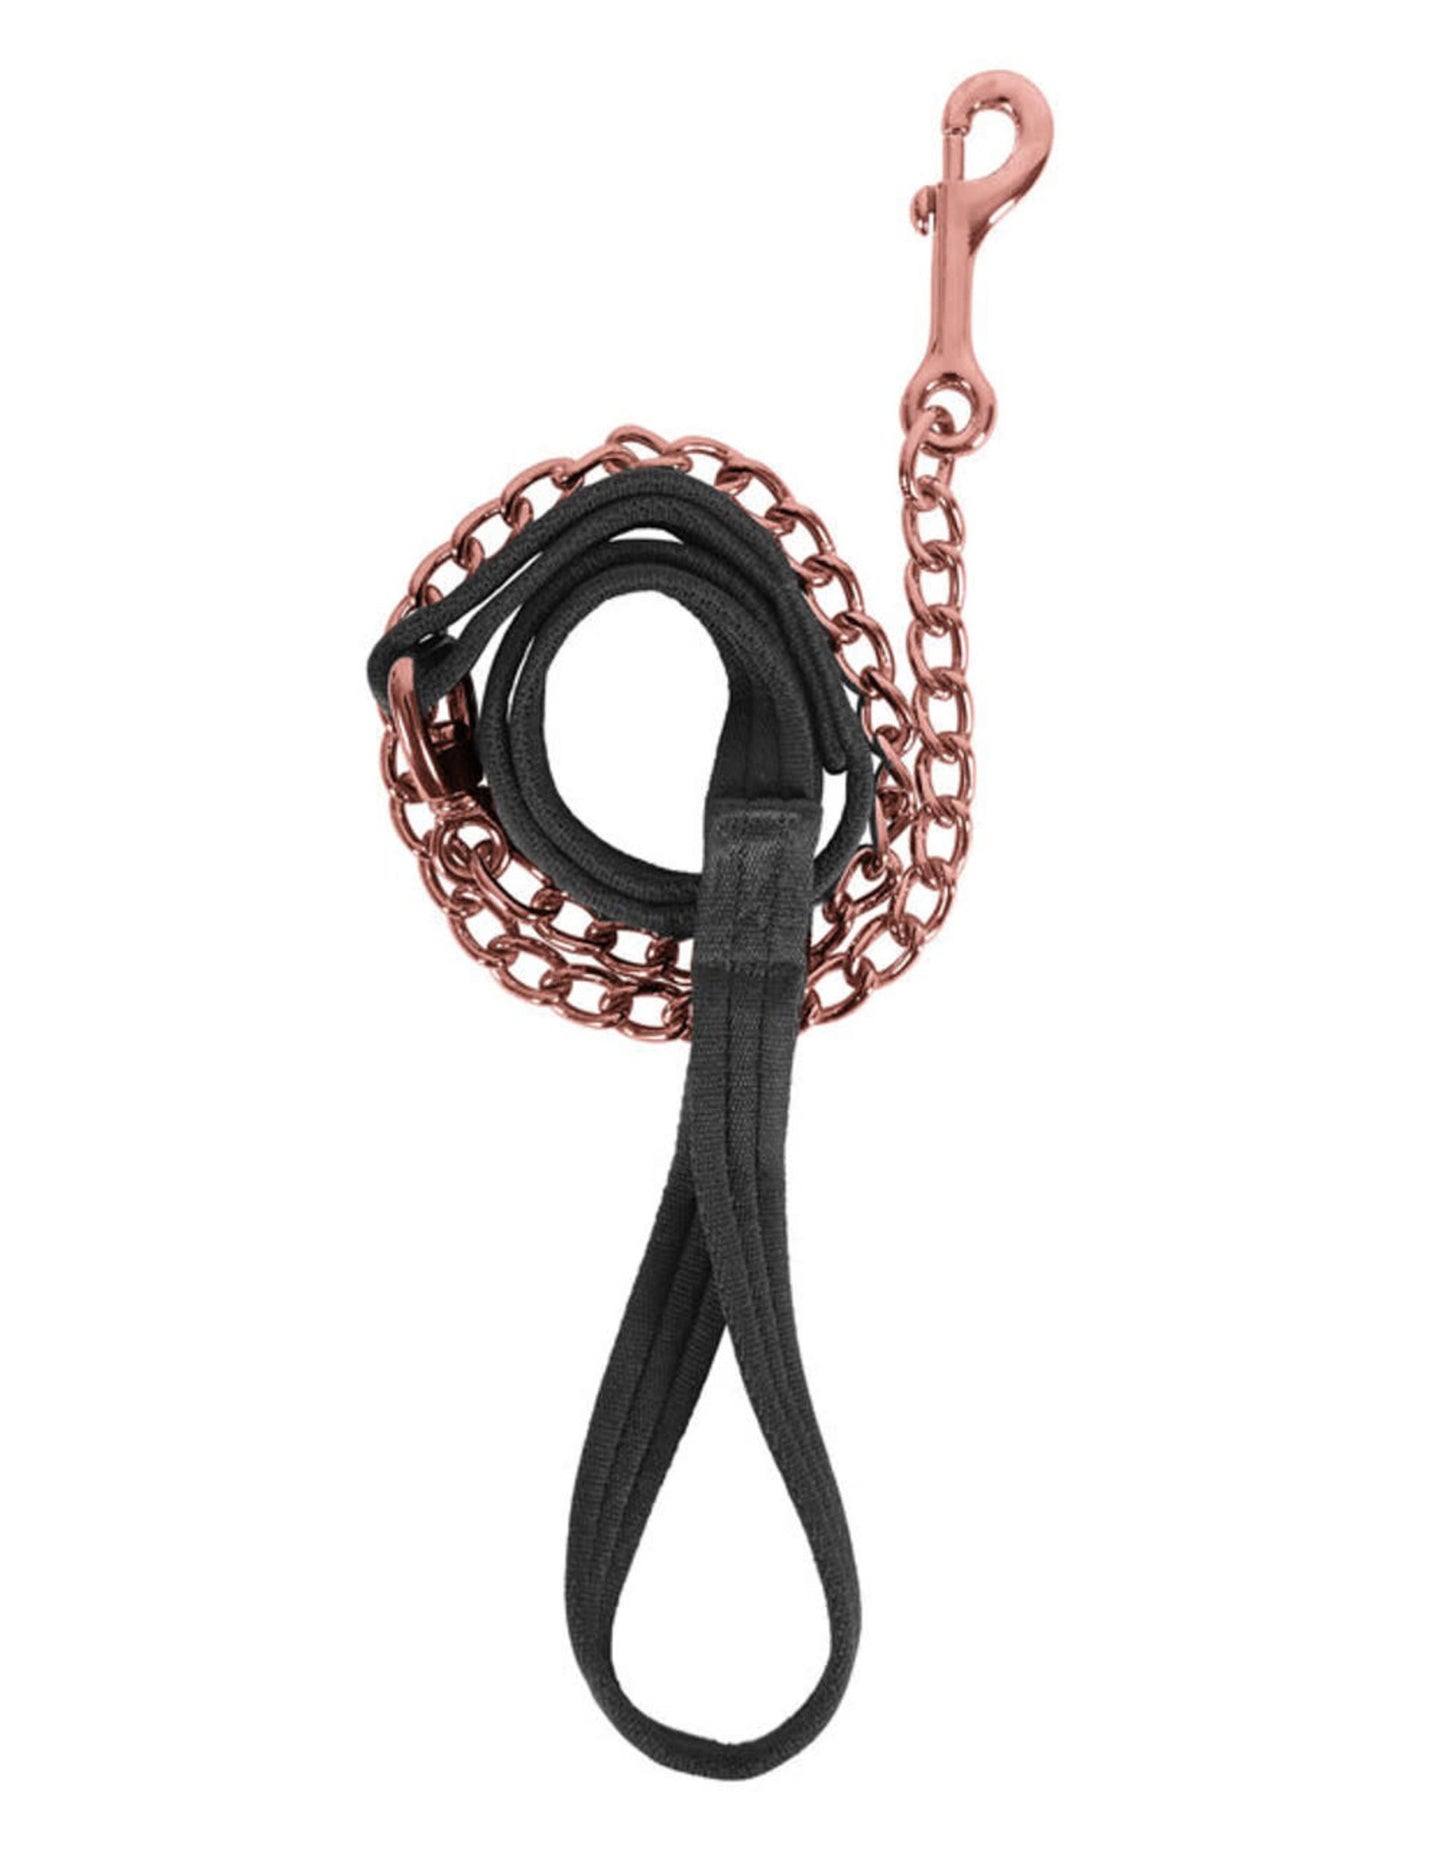 Waldhausen soft lead rope with chain